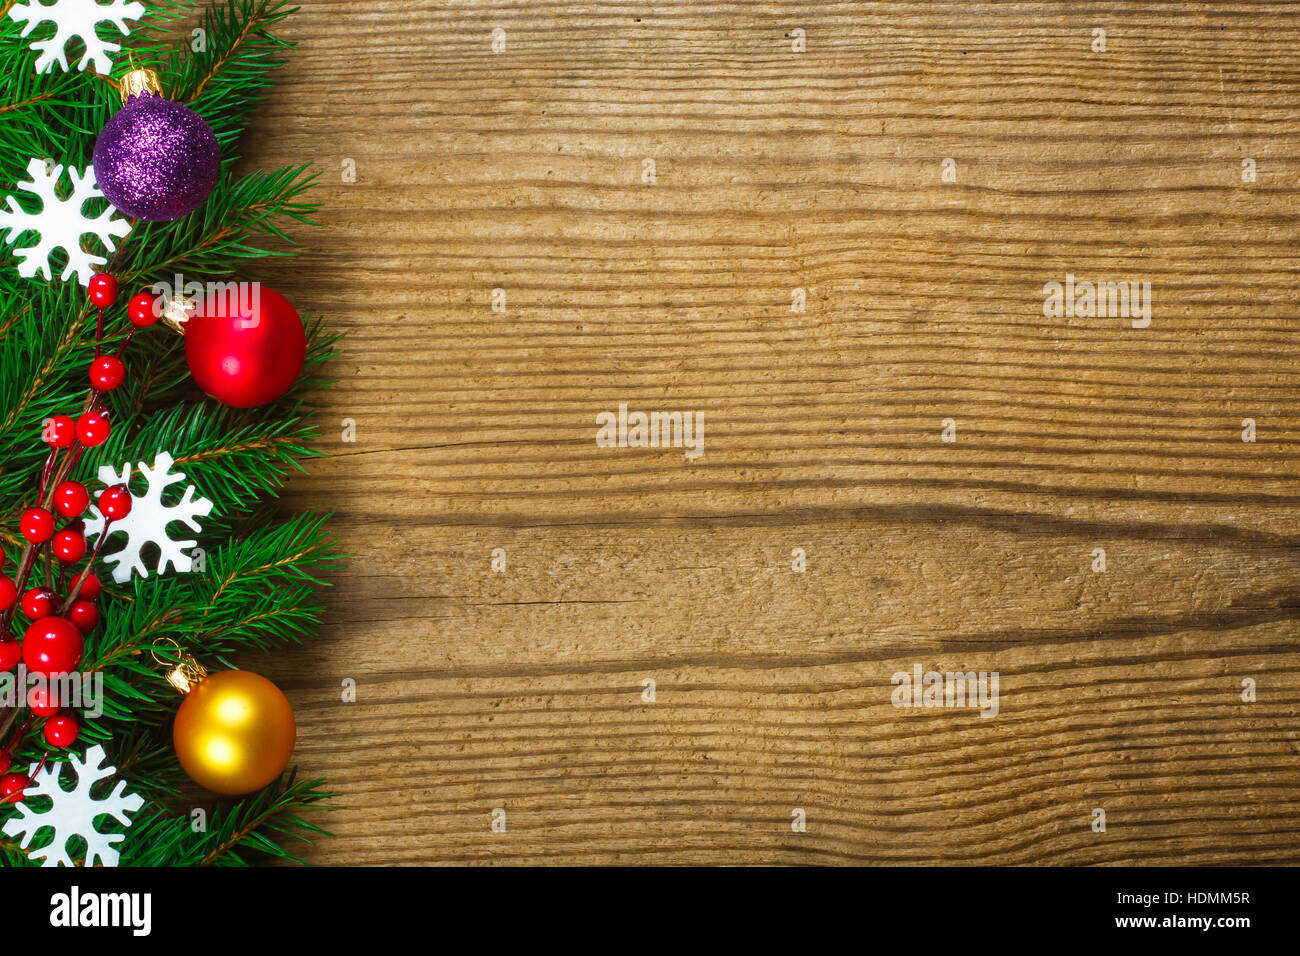 Christmas background - Christmas decorations on wooden table Stock Photo